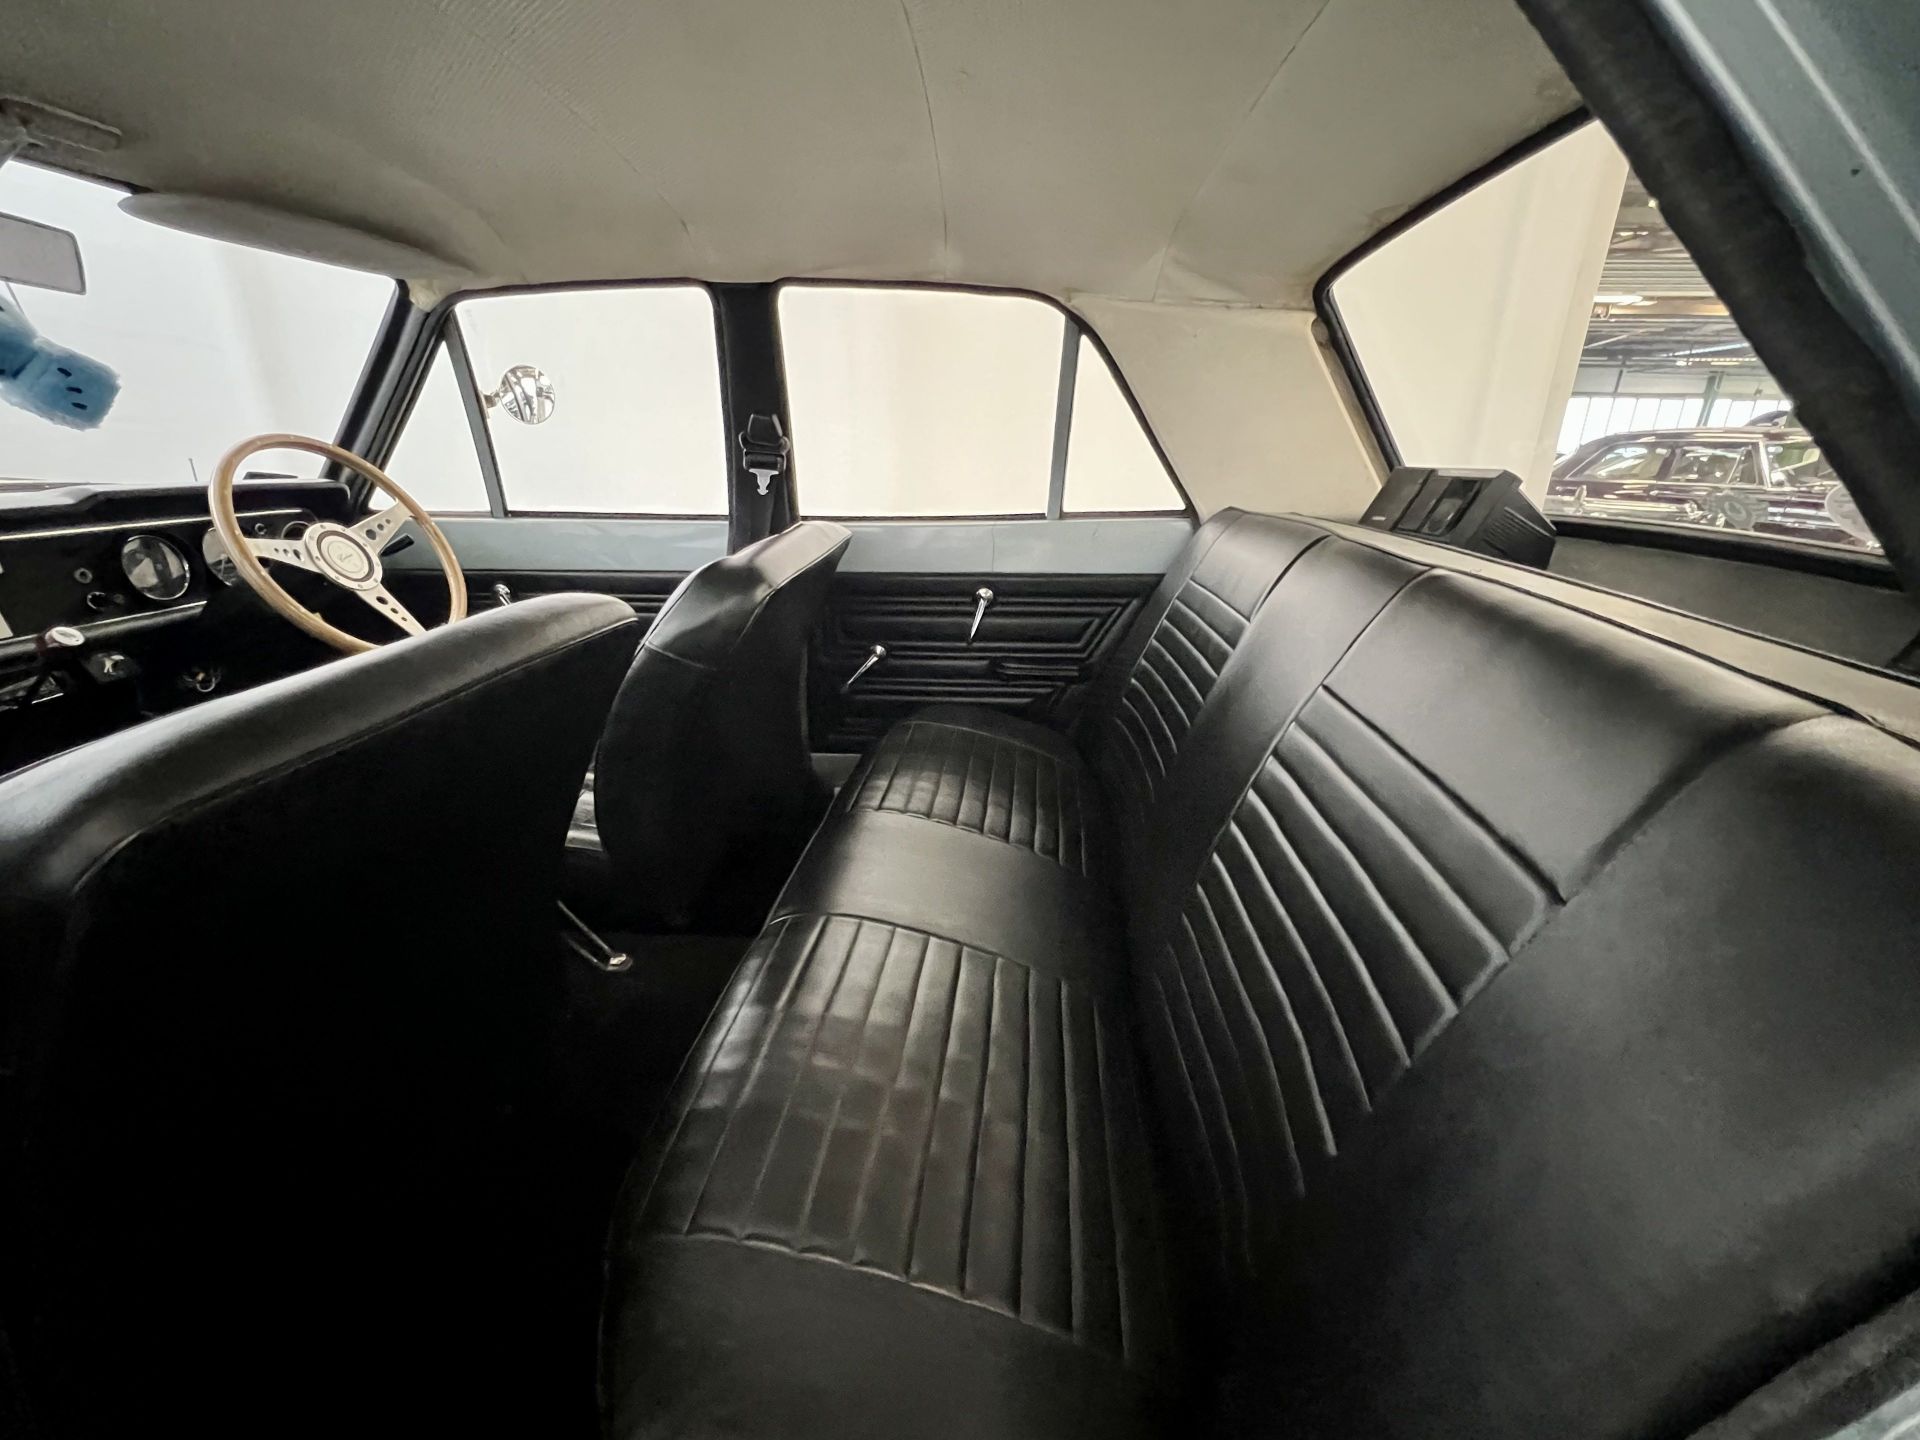 Ford Cortina 1300 DeLuxe - Image 25 of 36